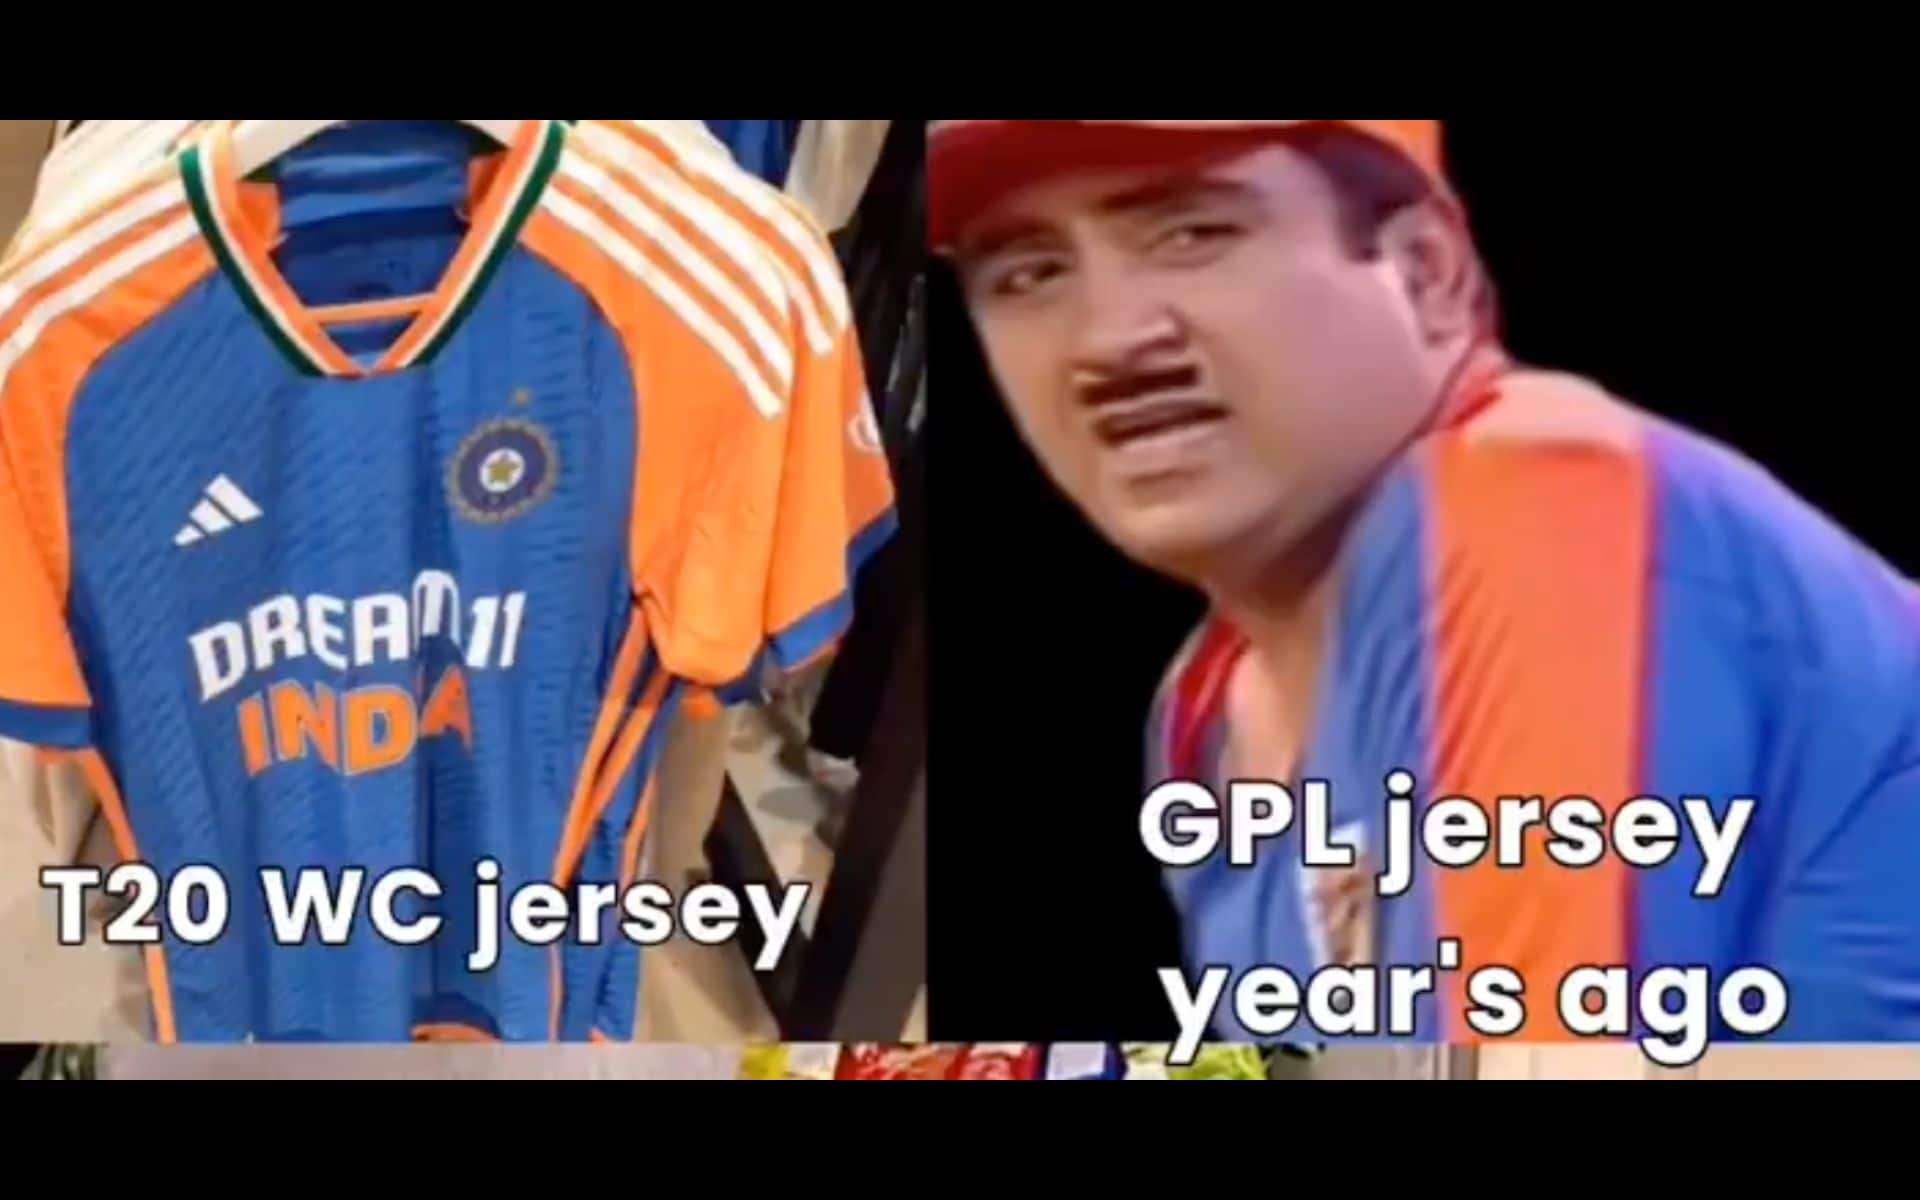 Is India's T20 World Cup Jersey Inspired By Jethalal's Taarak Mehta Ka Ooltah Chashmah?